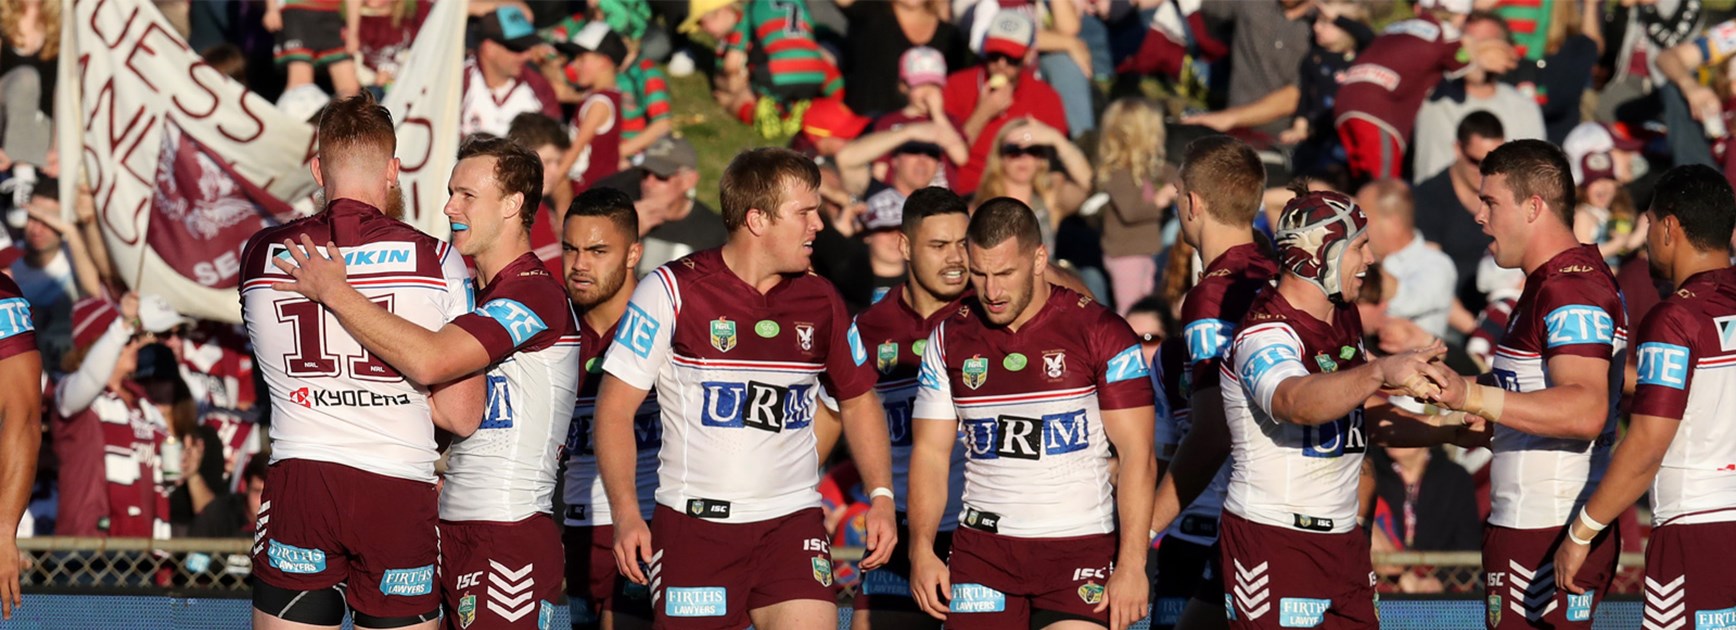 Manly celebrate a try against the Knights at Brookvale Oval in Round 21.